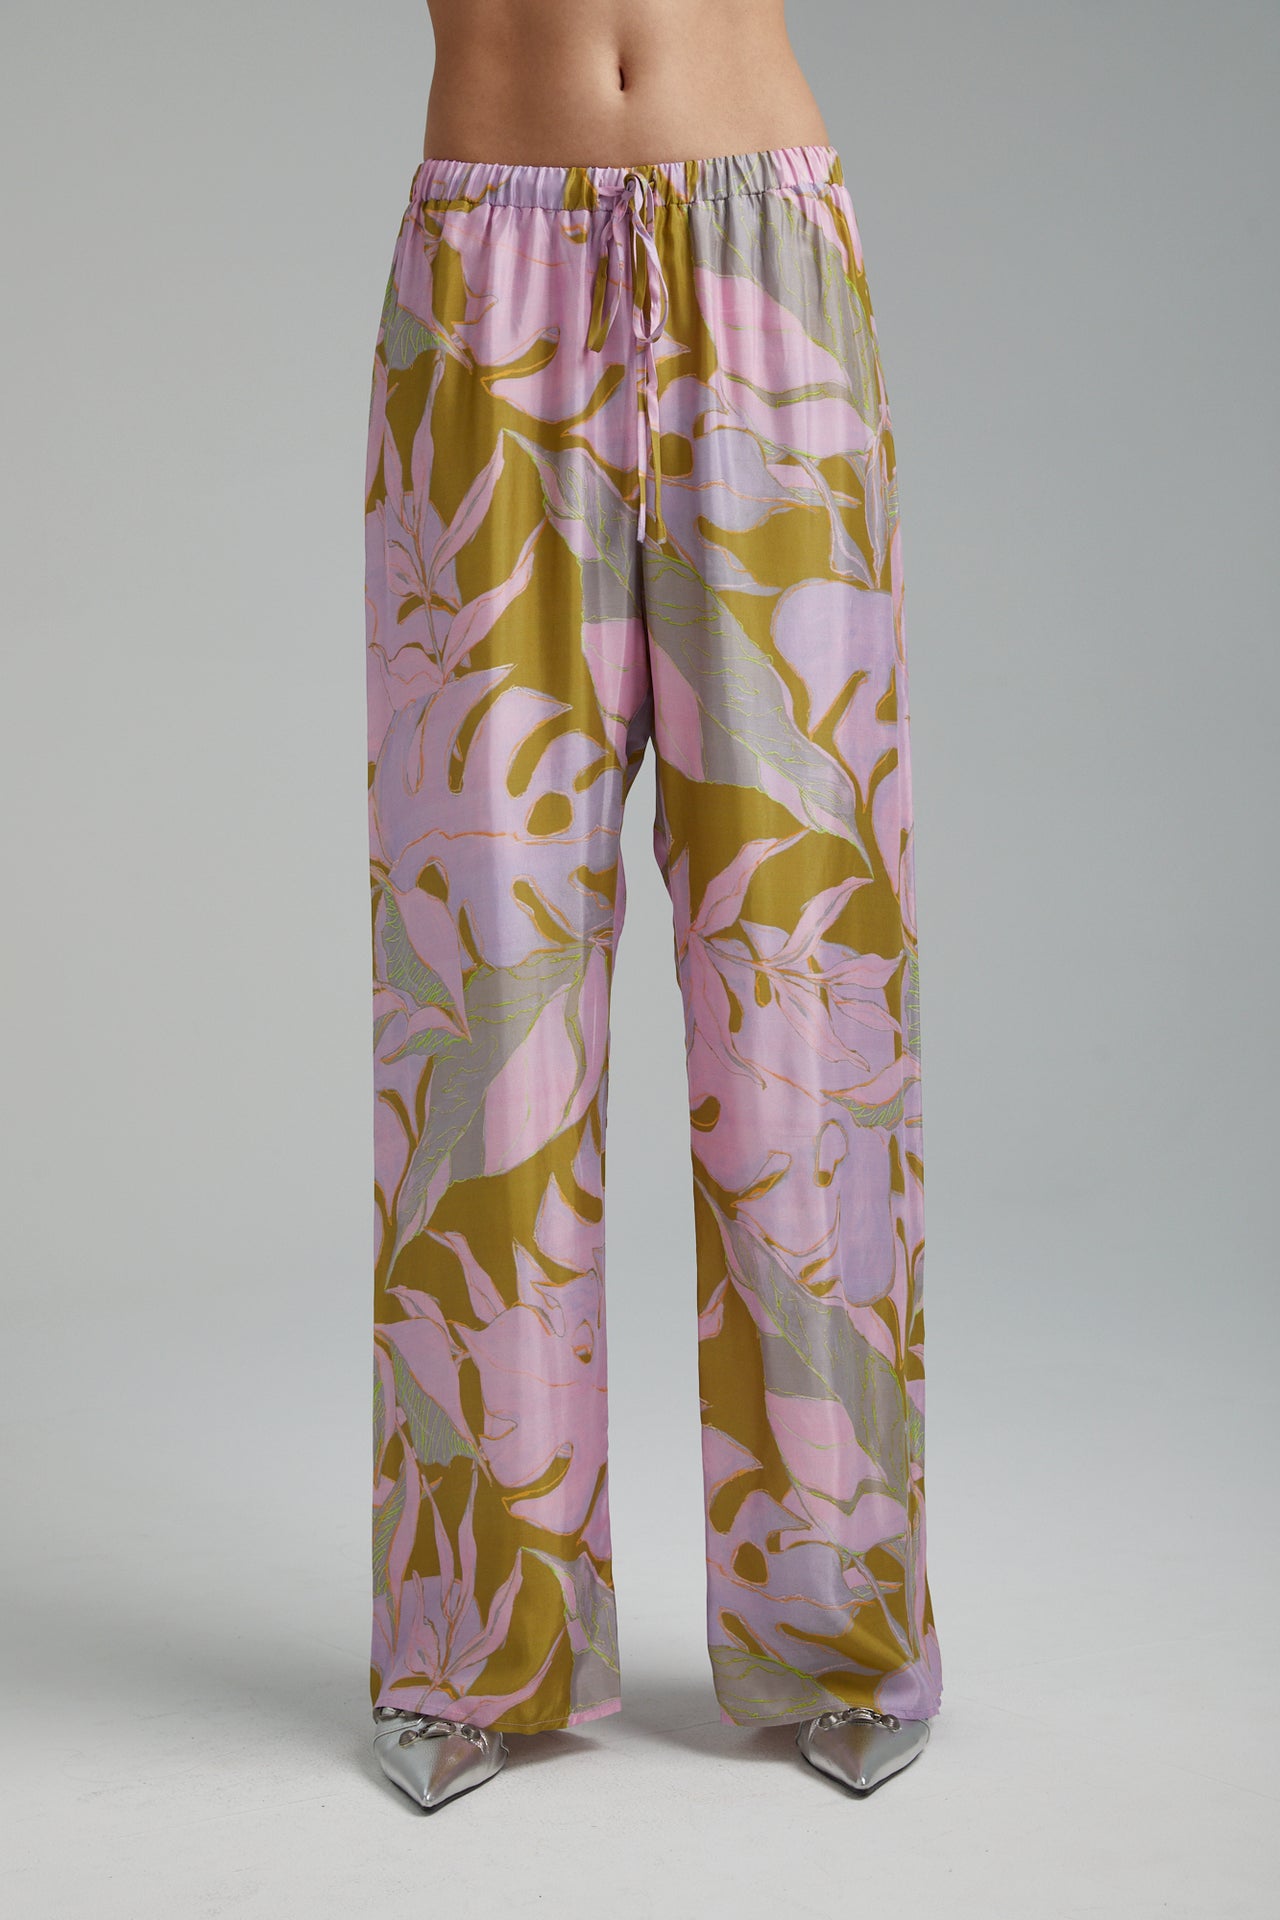 RELAXED DRAWSTRING PANT - PALMERS ISLAND